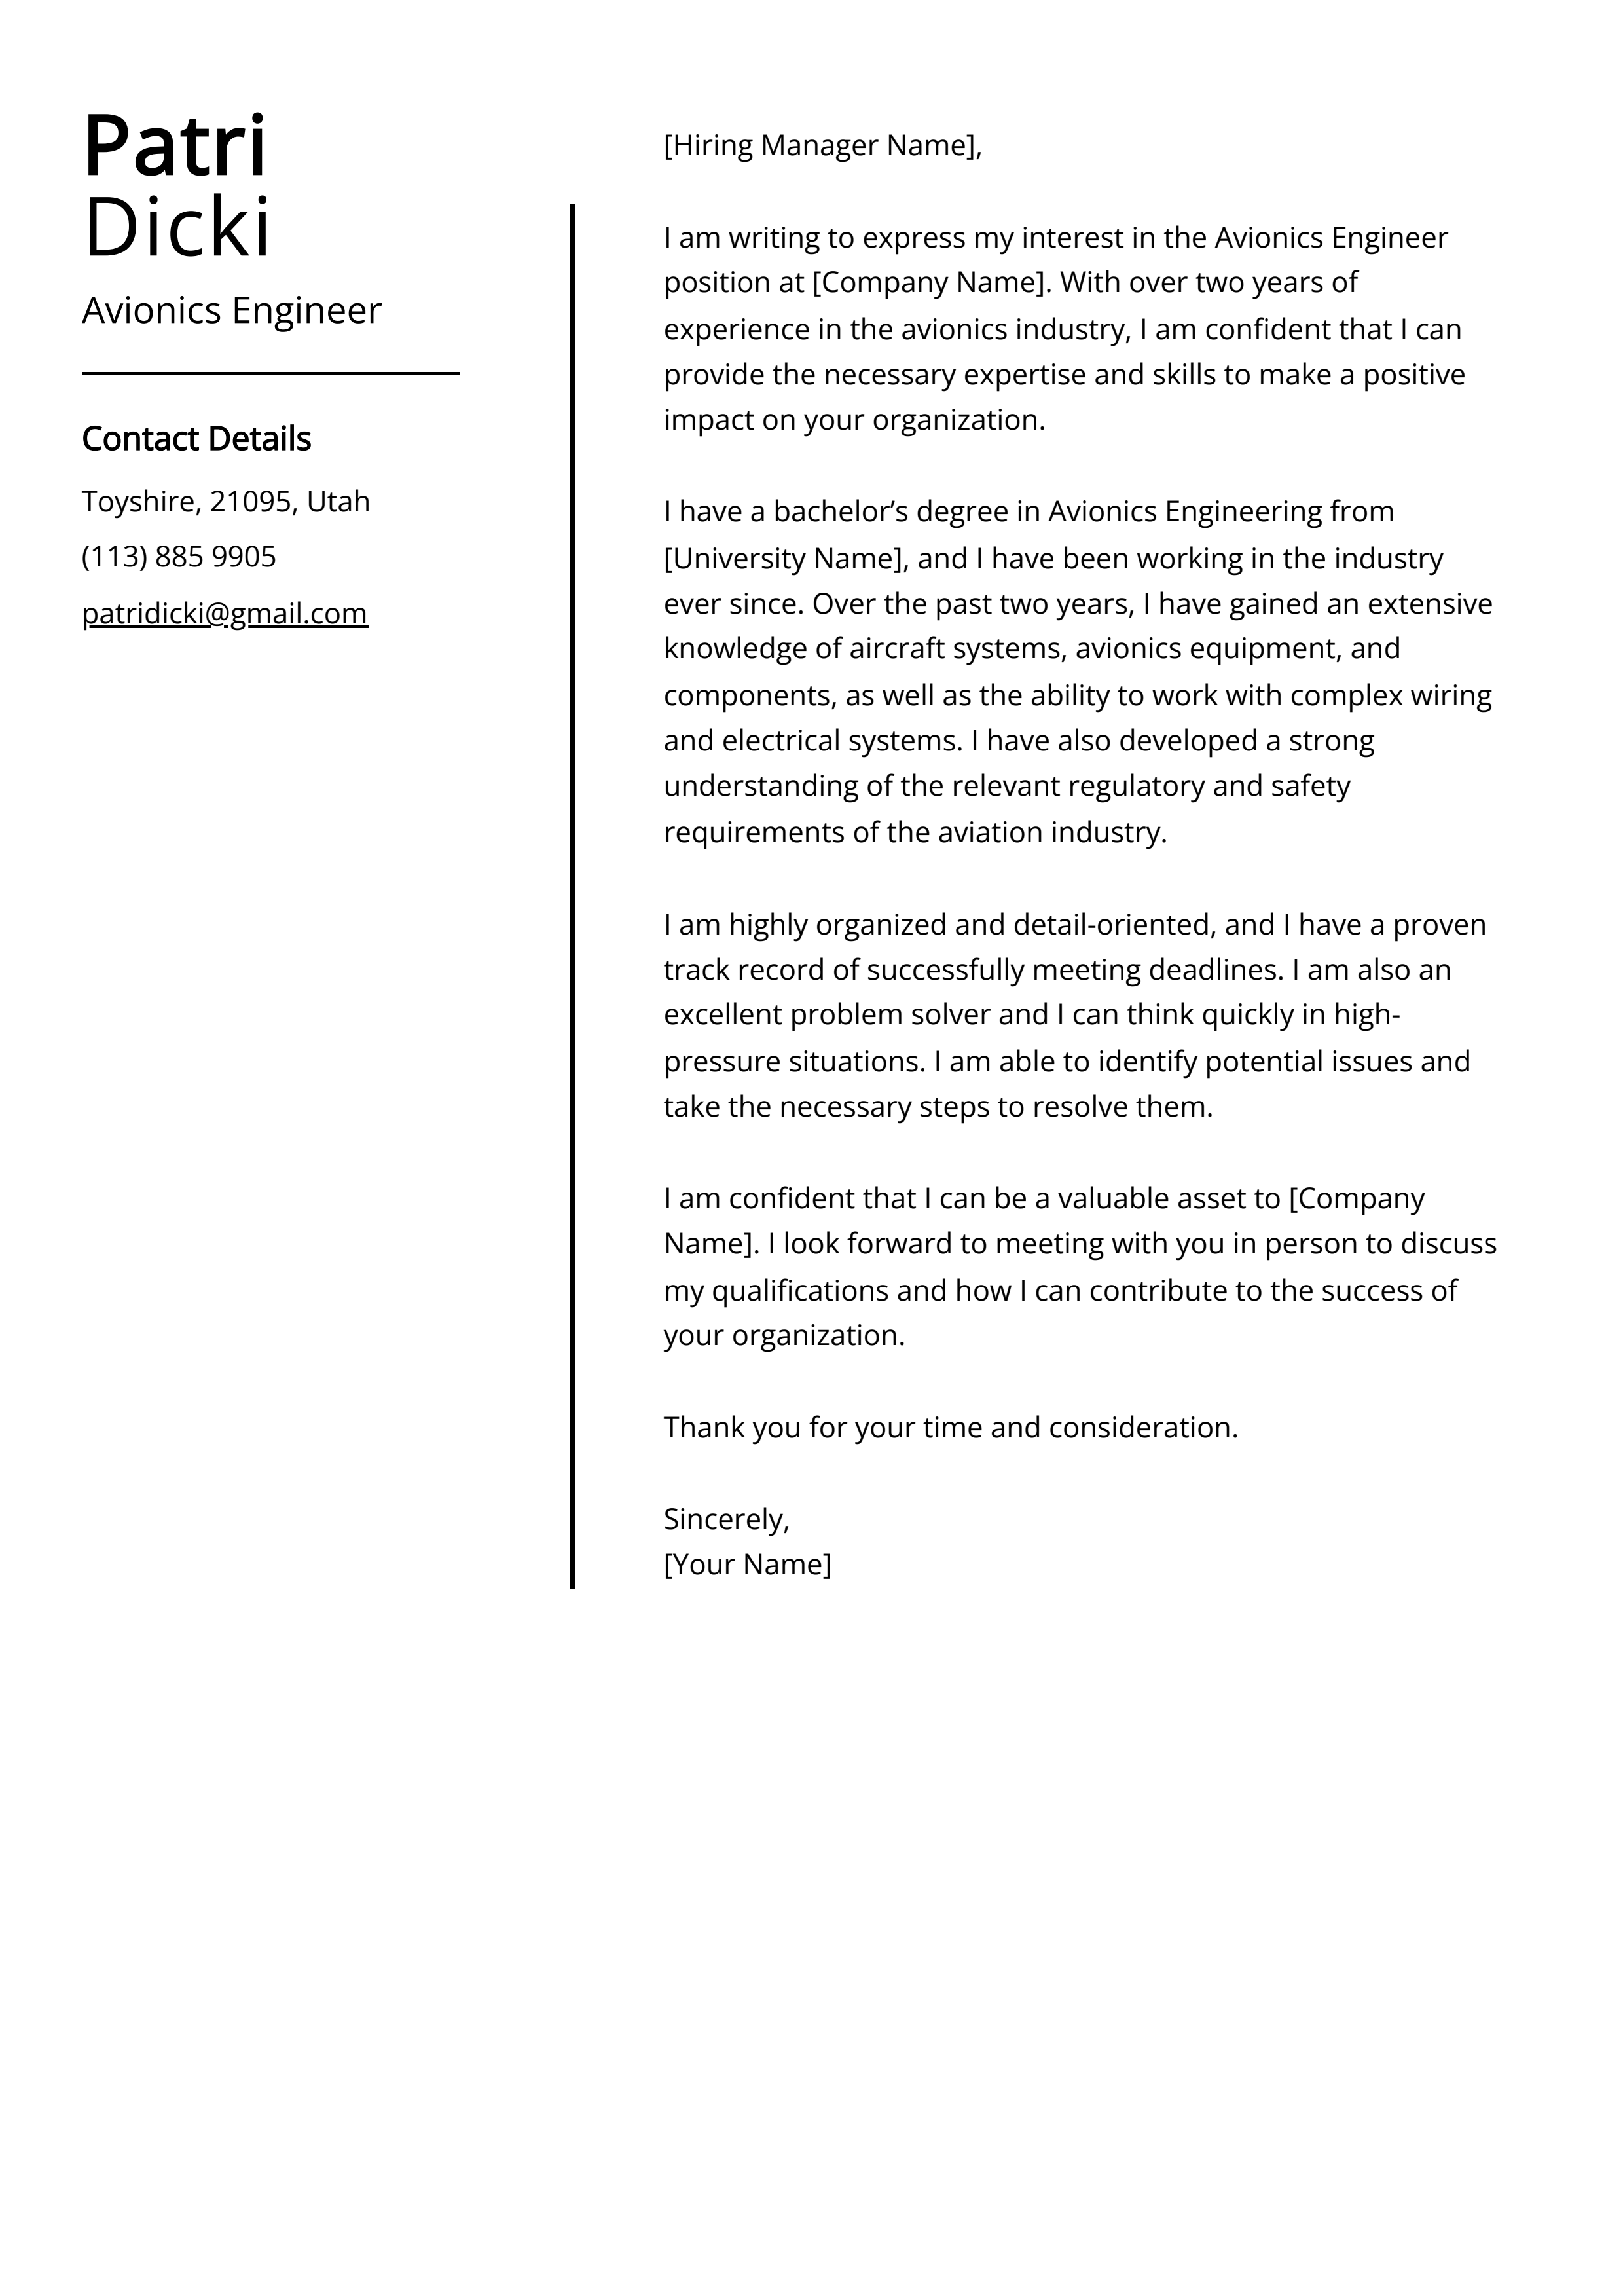 Avionics Engineer Cover Letter Example